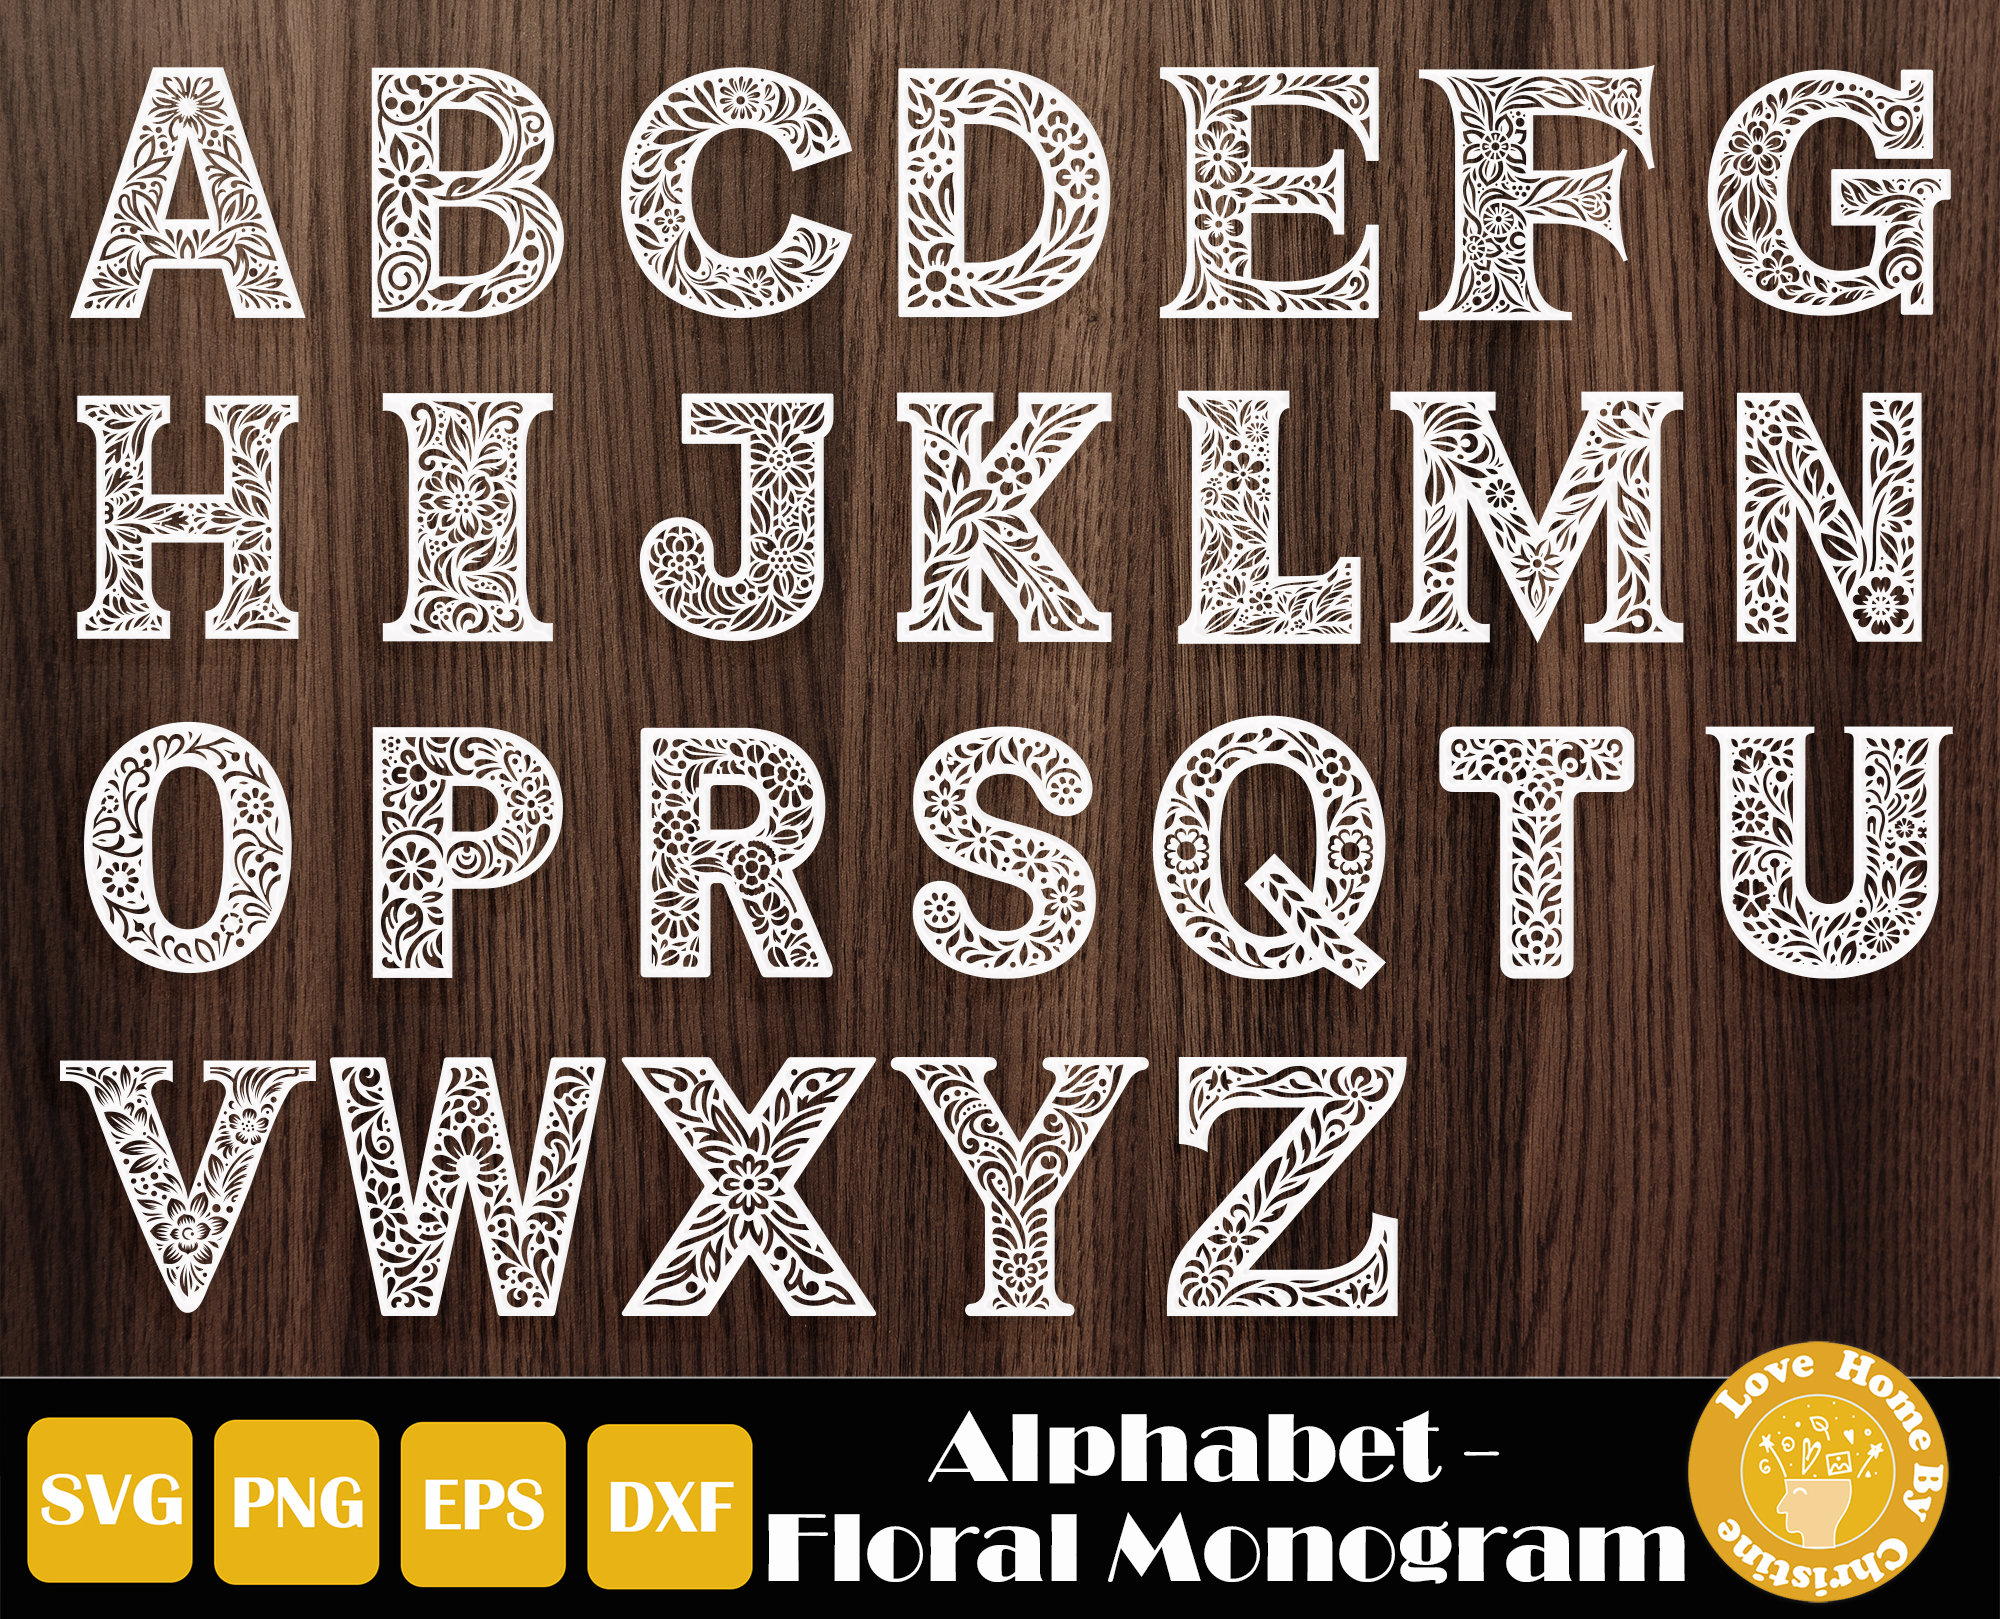 Fancy Gothic Alphabets Printable, Bold and Decorative Vintage Letters With  Fancy Scrollwork, 8 X 10.5 Inch Jpg, Large Uppercase Letters 